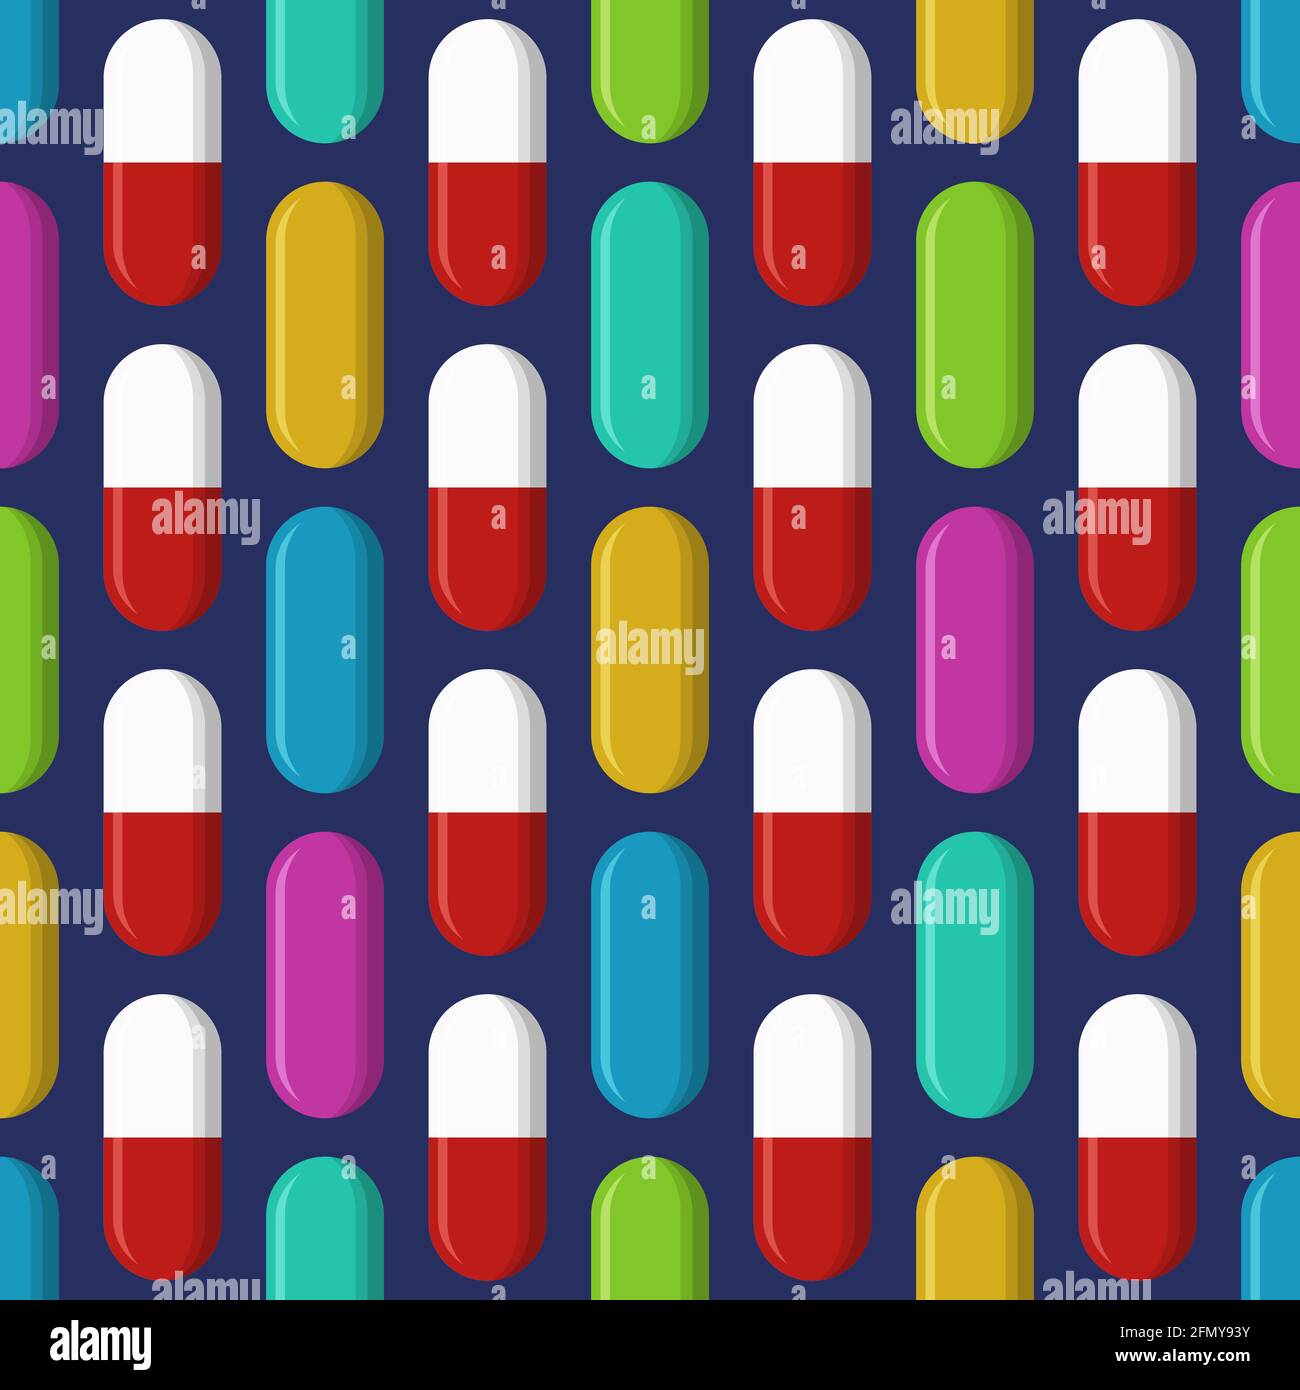 Vector seamless pattern with pills, tablets of different colors, isolated on dark blue background. Medical preparations. Flat design. Color. Stock Vector